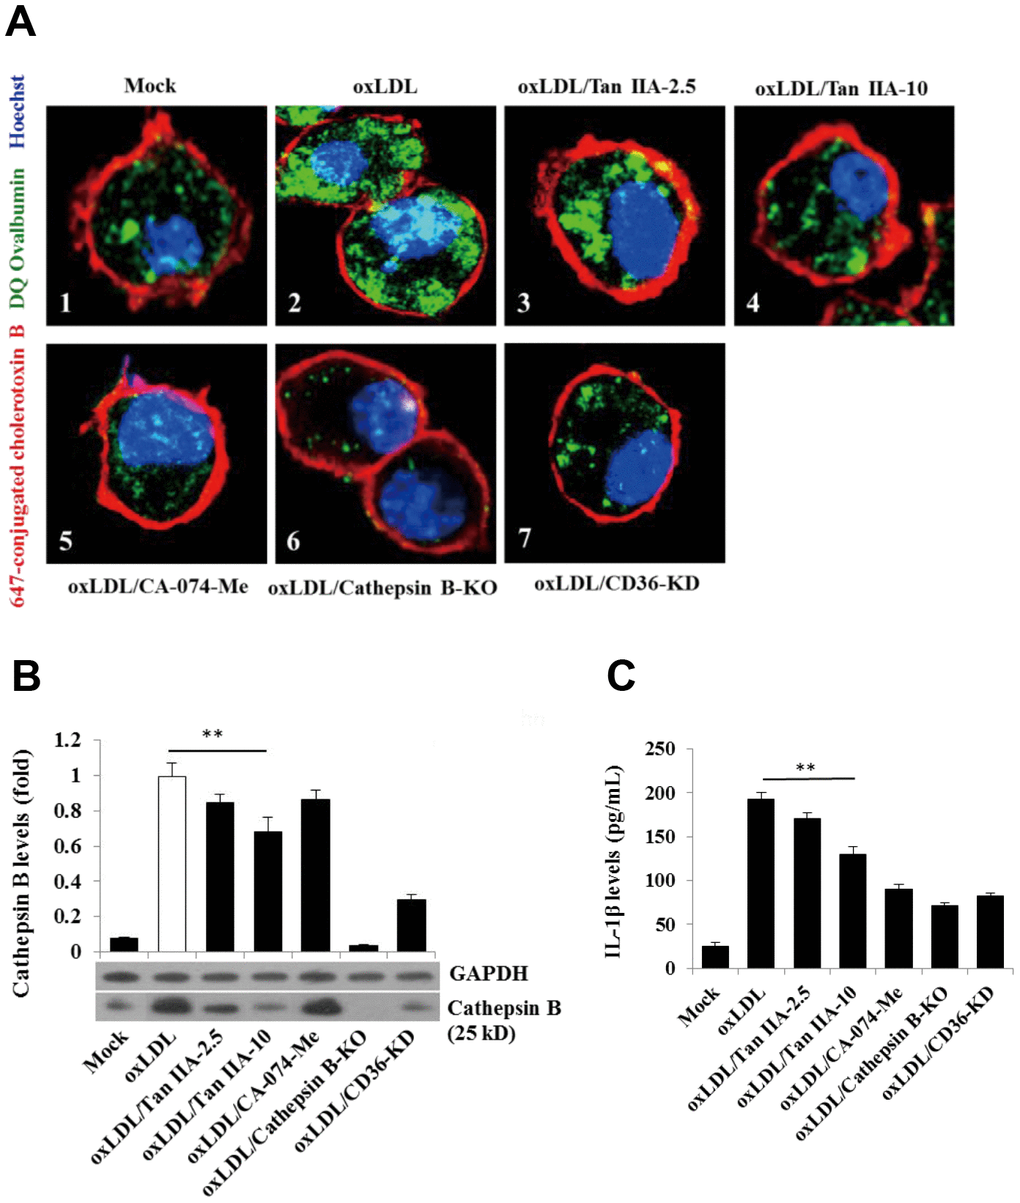 Tan IIA inhibits oxLDL-induced macrophage lysosomal damage and cathepsin B release. (A) Fluorescence confocal assay for oxLDL-induced cathepsin B release from lysosome of mouse B6 macrophages or cathepsin B-/- B6 macrophages under the different treatments, respectively. The cells were treated with oxLDL (50 μg/mL) alone (2), oxLDL plus 2.5 μg/mL Tan IIA (3), oxLDL plus 10 μg/mL Tan IIA (4) and oxLDL plus Cathepsin B inhibitor CA-074-Me (5). The Cathepsin B-/- mouse macrophages (6) were treated with oxLDL alone. The small interfering RNA-mediated CD36 silenced-mouse B6 macrophages (7) were treated with oxLDL alone. All the cells were stained with Alexa 647-conjugated cholera toxin B (membrane staining, red), and then with DQ ovalbumin (cathepsin B staining, green) and Hoechst dye (nuclei staining, blue) after saponin treatment. (B) Western blot detection for Cathepsin B releases from cytosol of oxLDL-induced B6 macrophages or cathepsin B-/- B6 macrophages treated with digitonin and phenylmethylsulfonyl fluoride (PMSF). (C) ELISA assay for oxLDL-induced Il-1β releases from mouse B6 macrophages or cathepsin B-/- B6 macrophages under the different treatments.